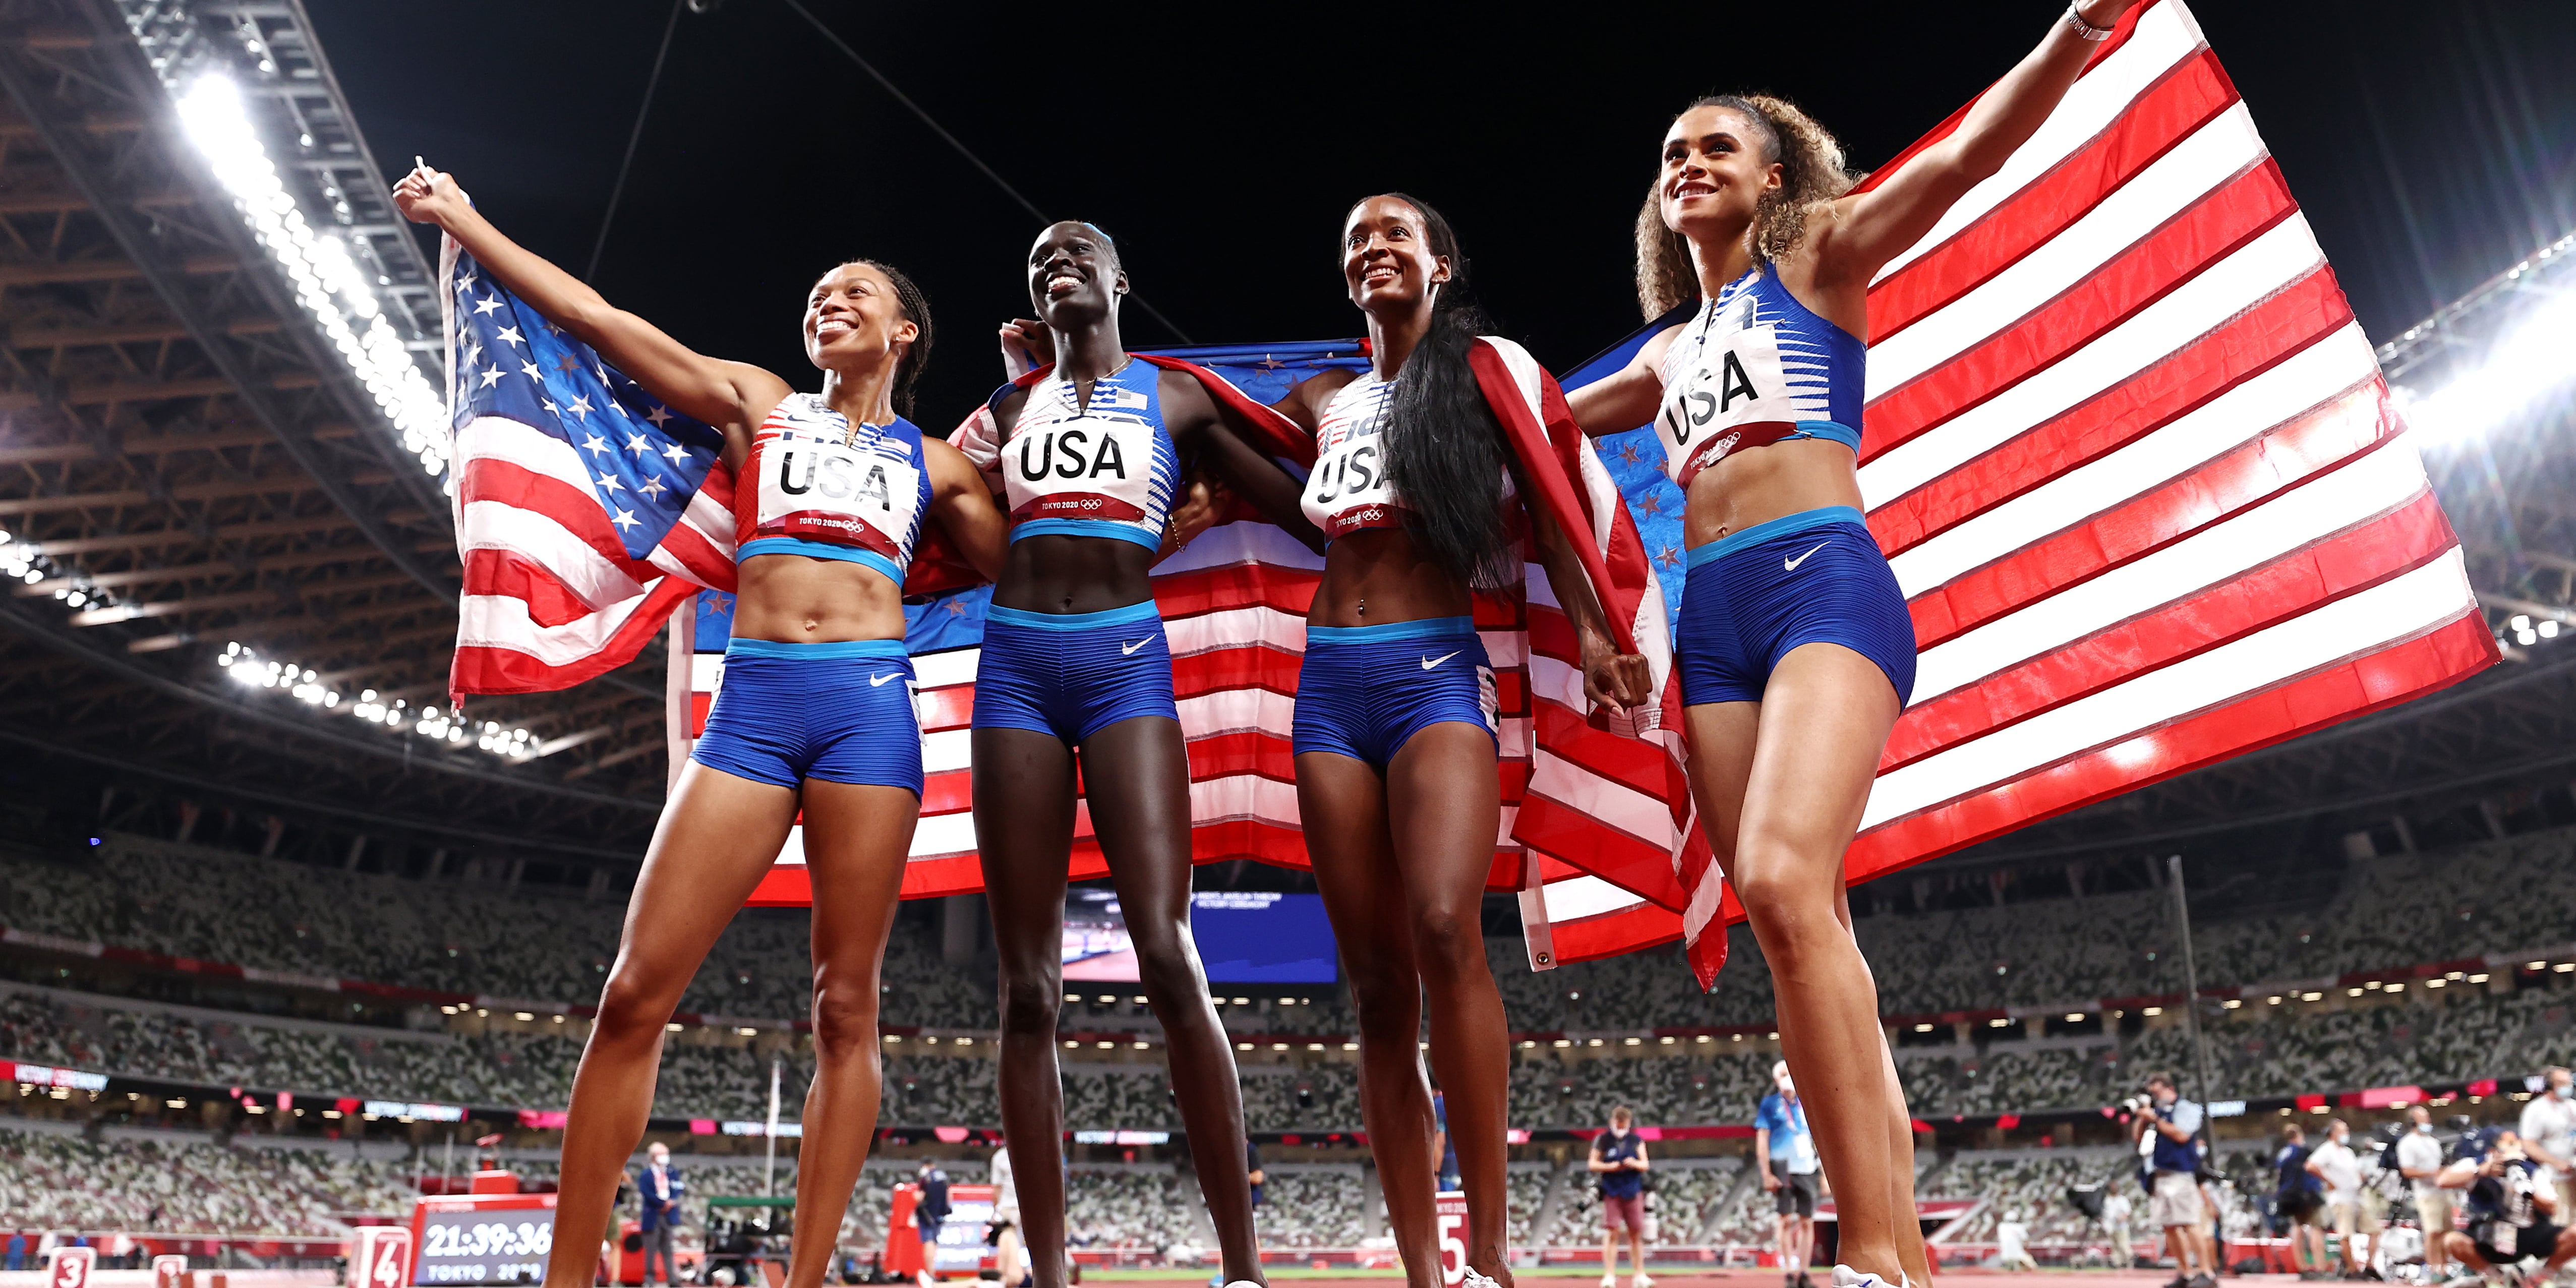 Team USA Wins Gold in Women's 4x400m Relay at 2021 Olympics POPSUGAR